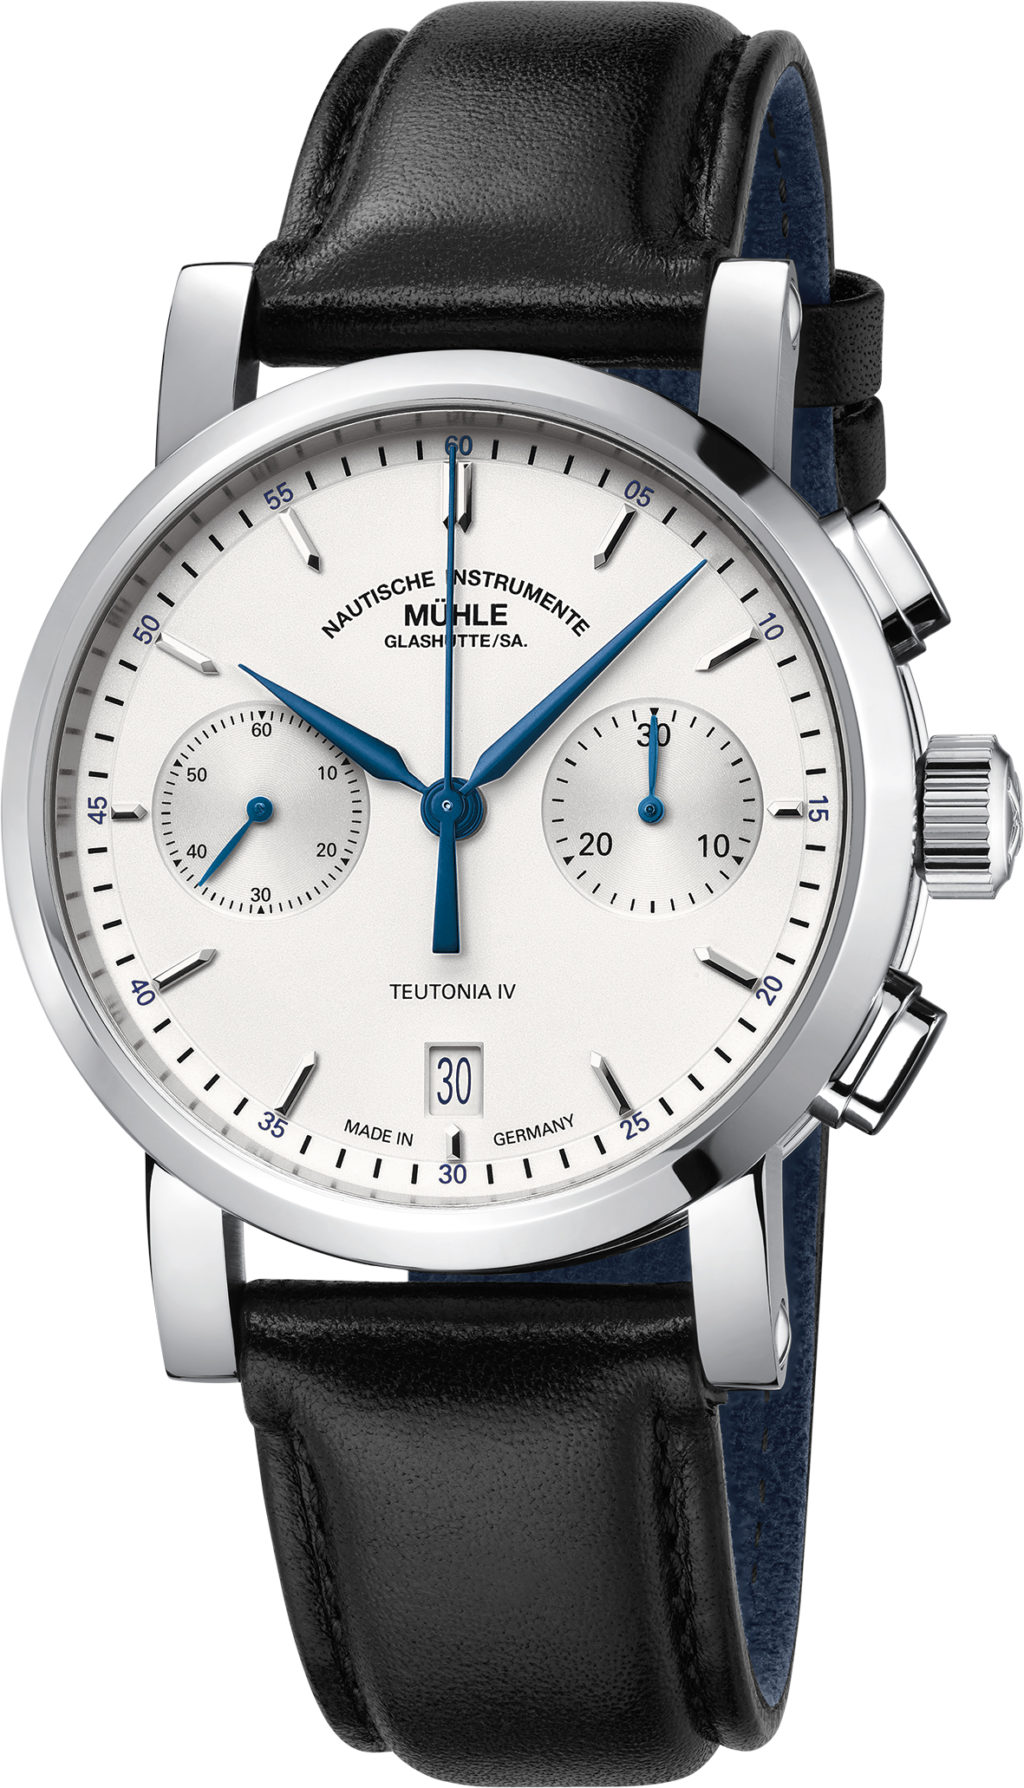 Mühle-Glashütte Expands Teutonia IV Collection with Four New Models ...